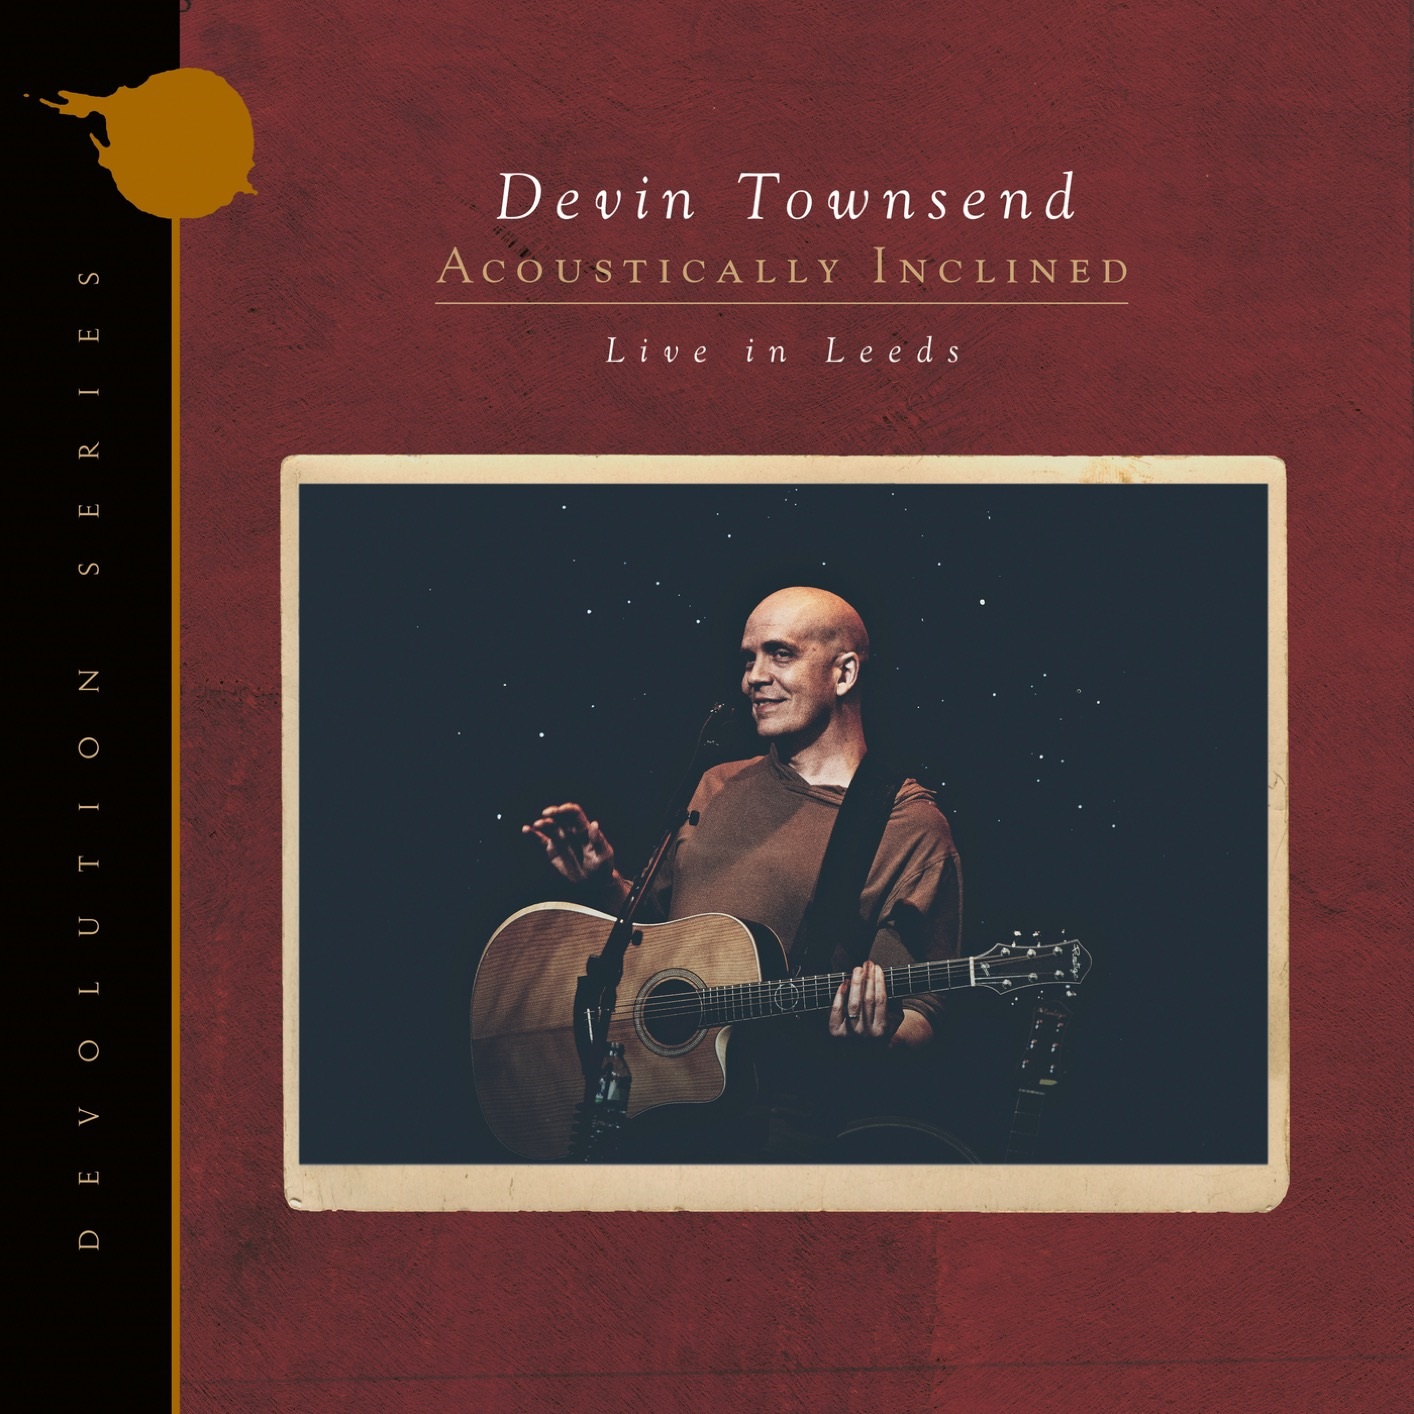 Devin Townsend - Devolution Series #1 - Acoustically Inclined, Live in Leeds (2021) [FLAC 24bit/48kHz]